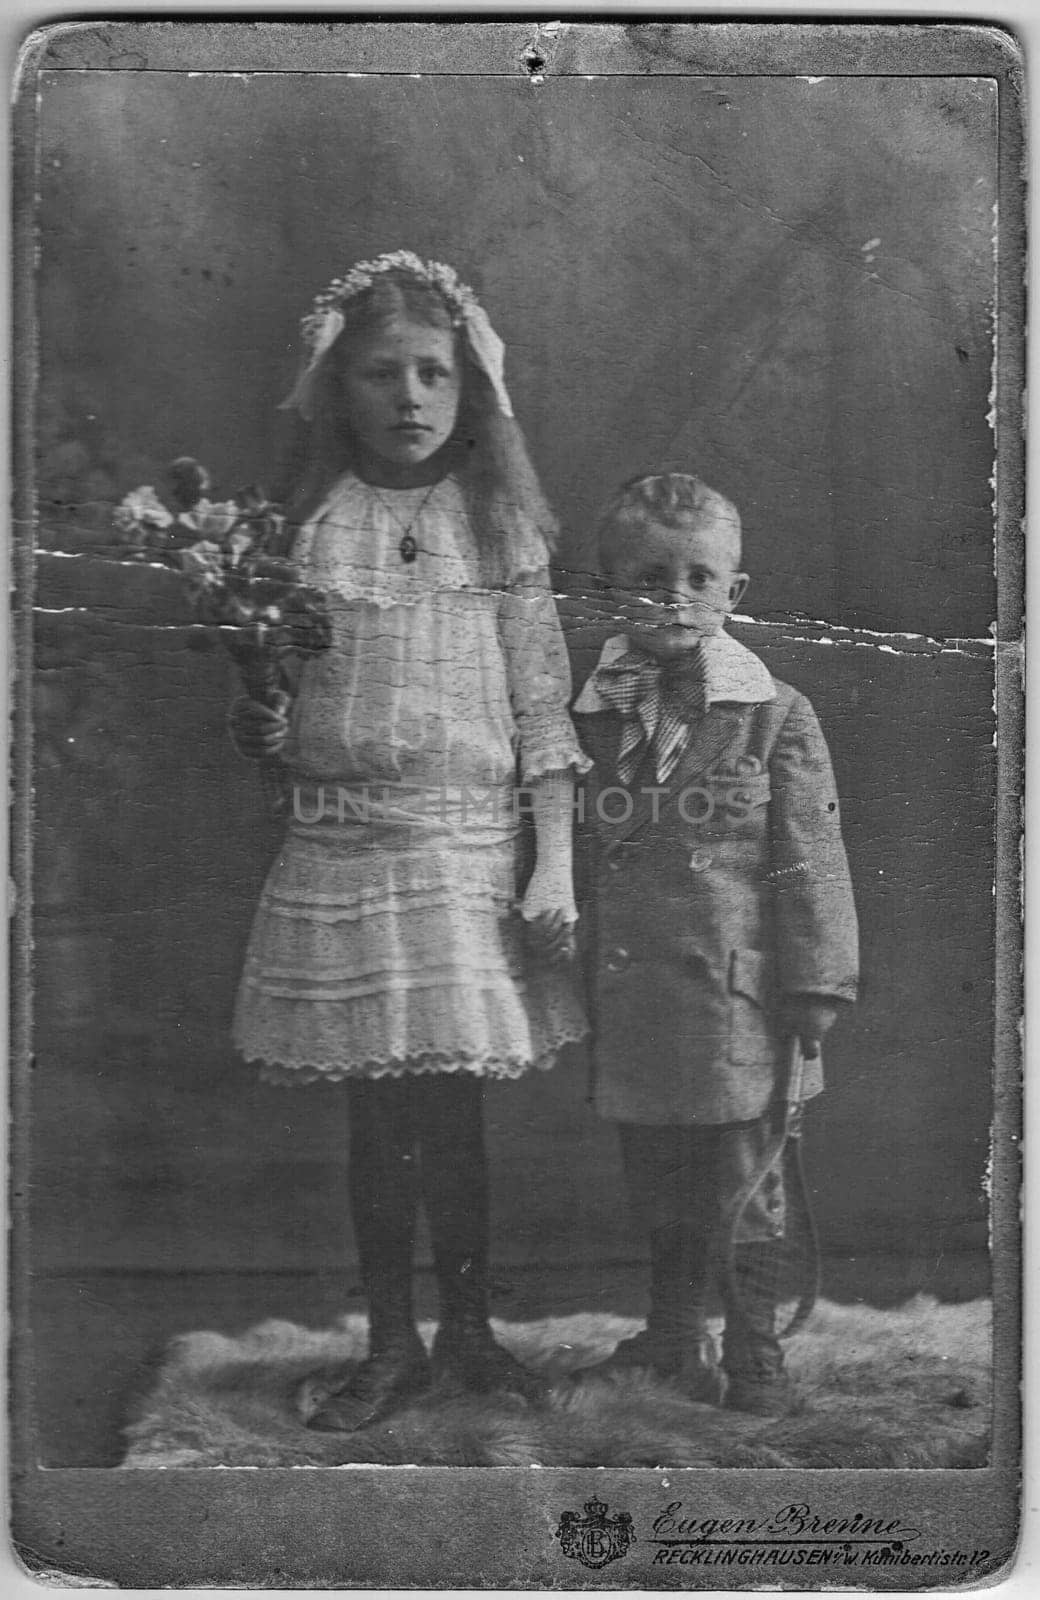 RECKLINGHAUSEN, GERMANY - CIRCA 1910s: Vintage photo shows siblings - sister and brother. About 10 and 7 years old. Studio black and white portrait.